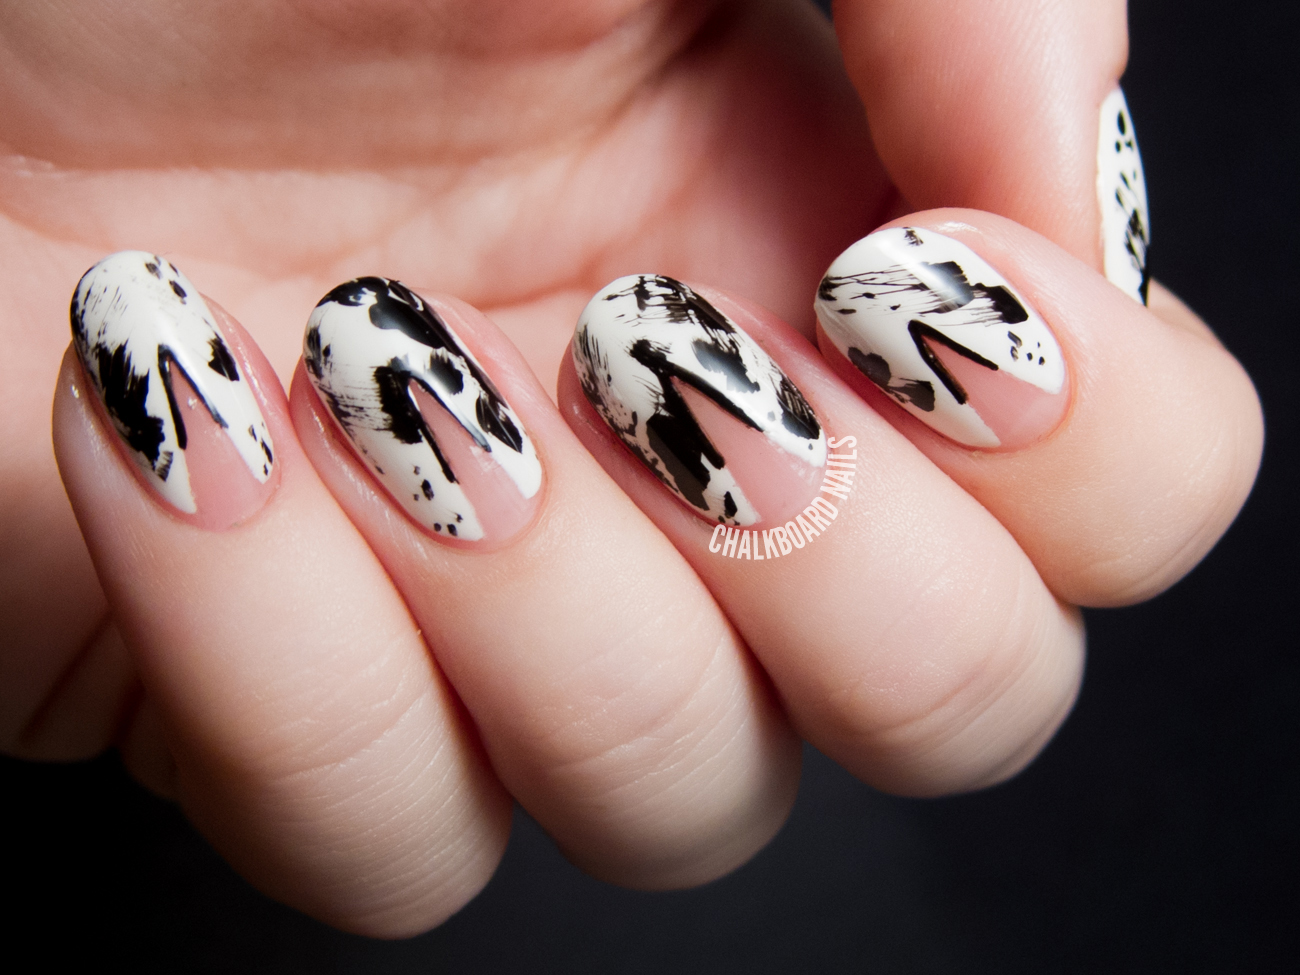 8. Square Nail Designs with Negative Space - wide 7